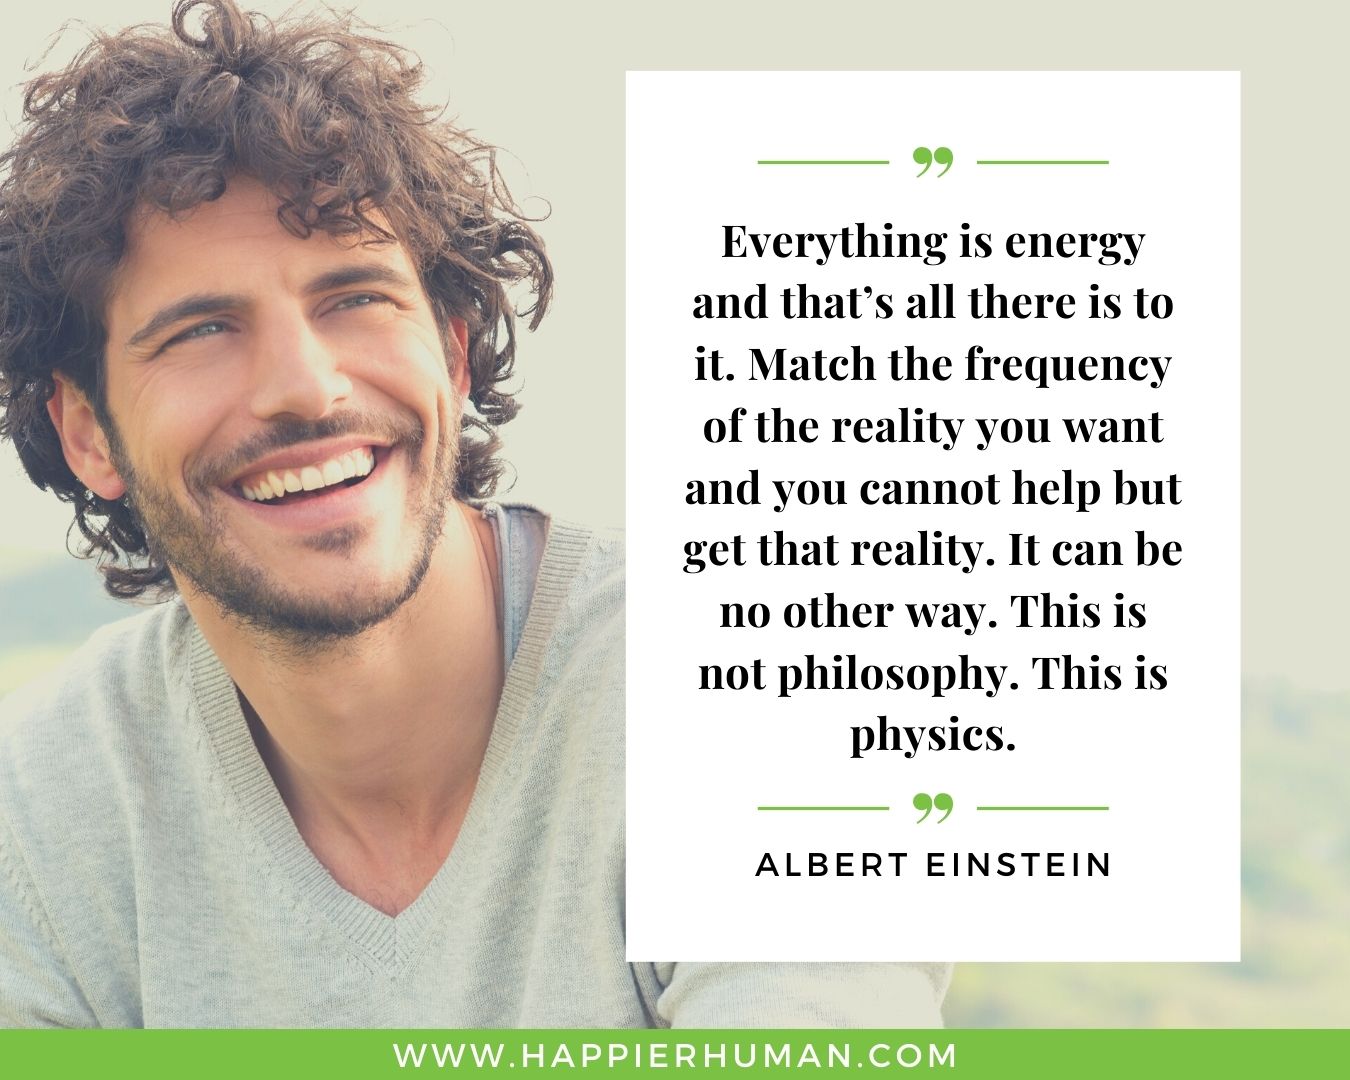 Positive Energy Quotes - “Everything is energy and that’s all there is to it. Match the frequency of the reality you want and you cannot help but get that reality. It can be no other way. This is not philosophy. This is physics.” - Albert Einstein